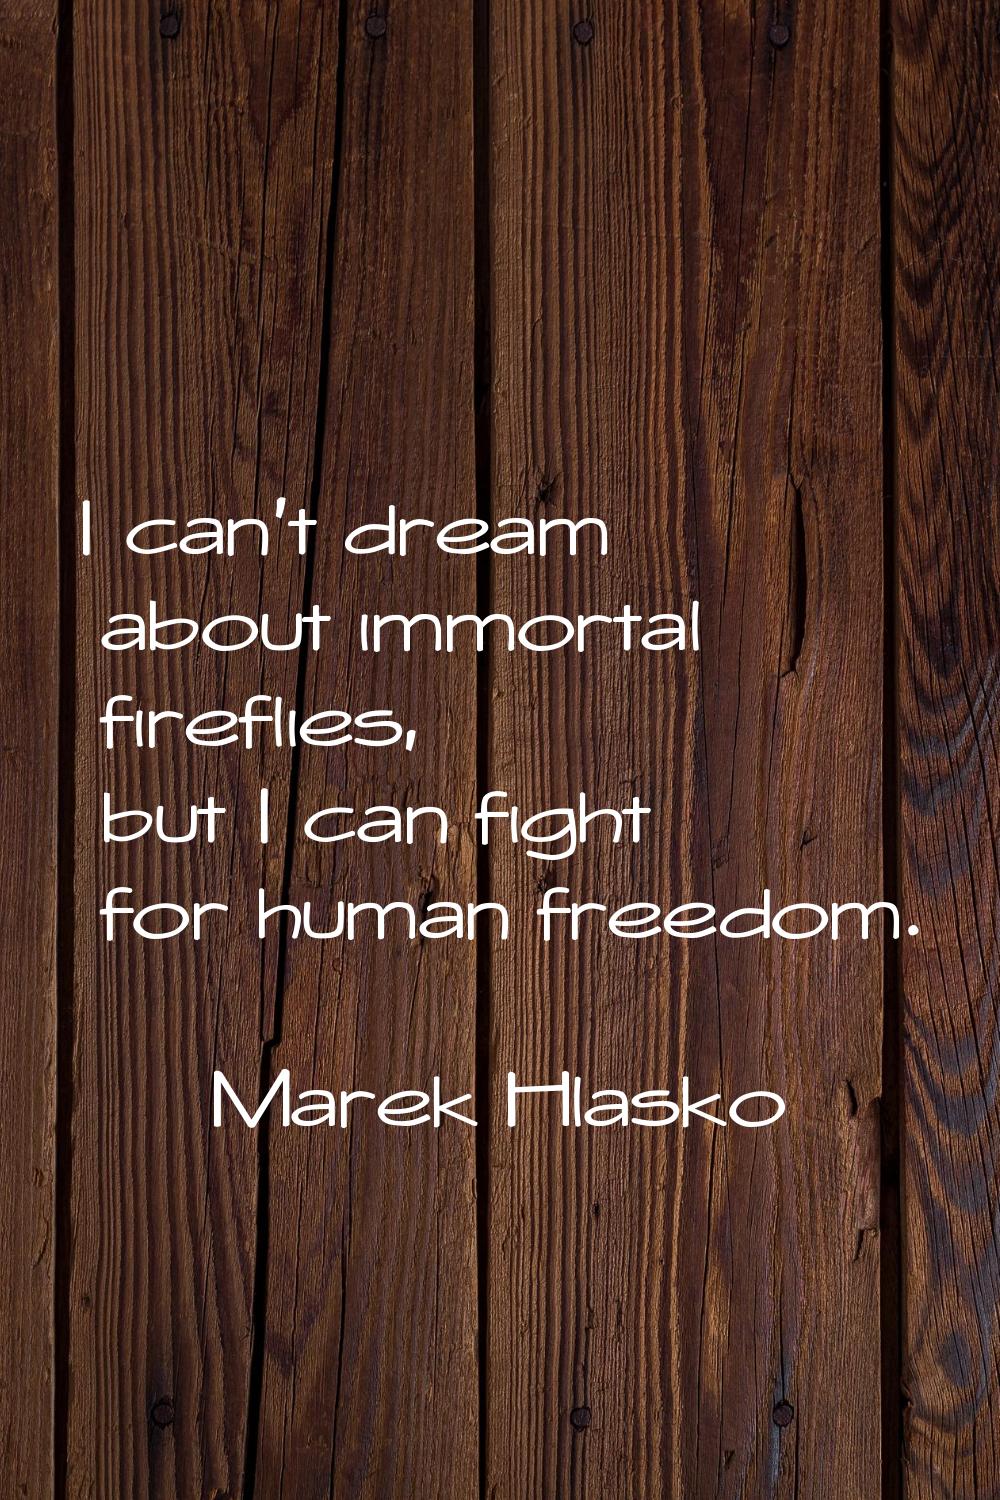 I can't dream about immortal fireflies, but I can fight for human freedom.